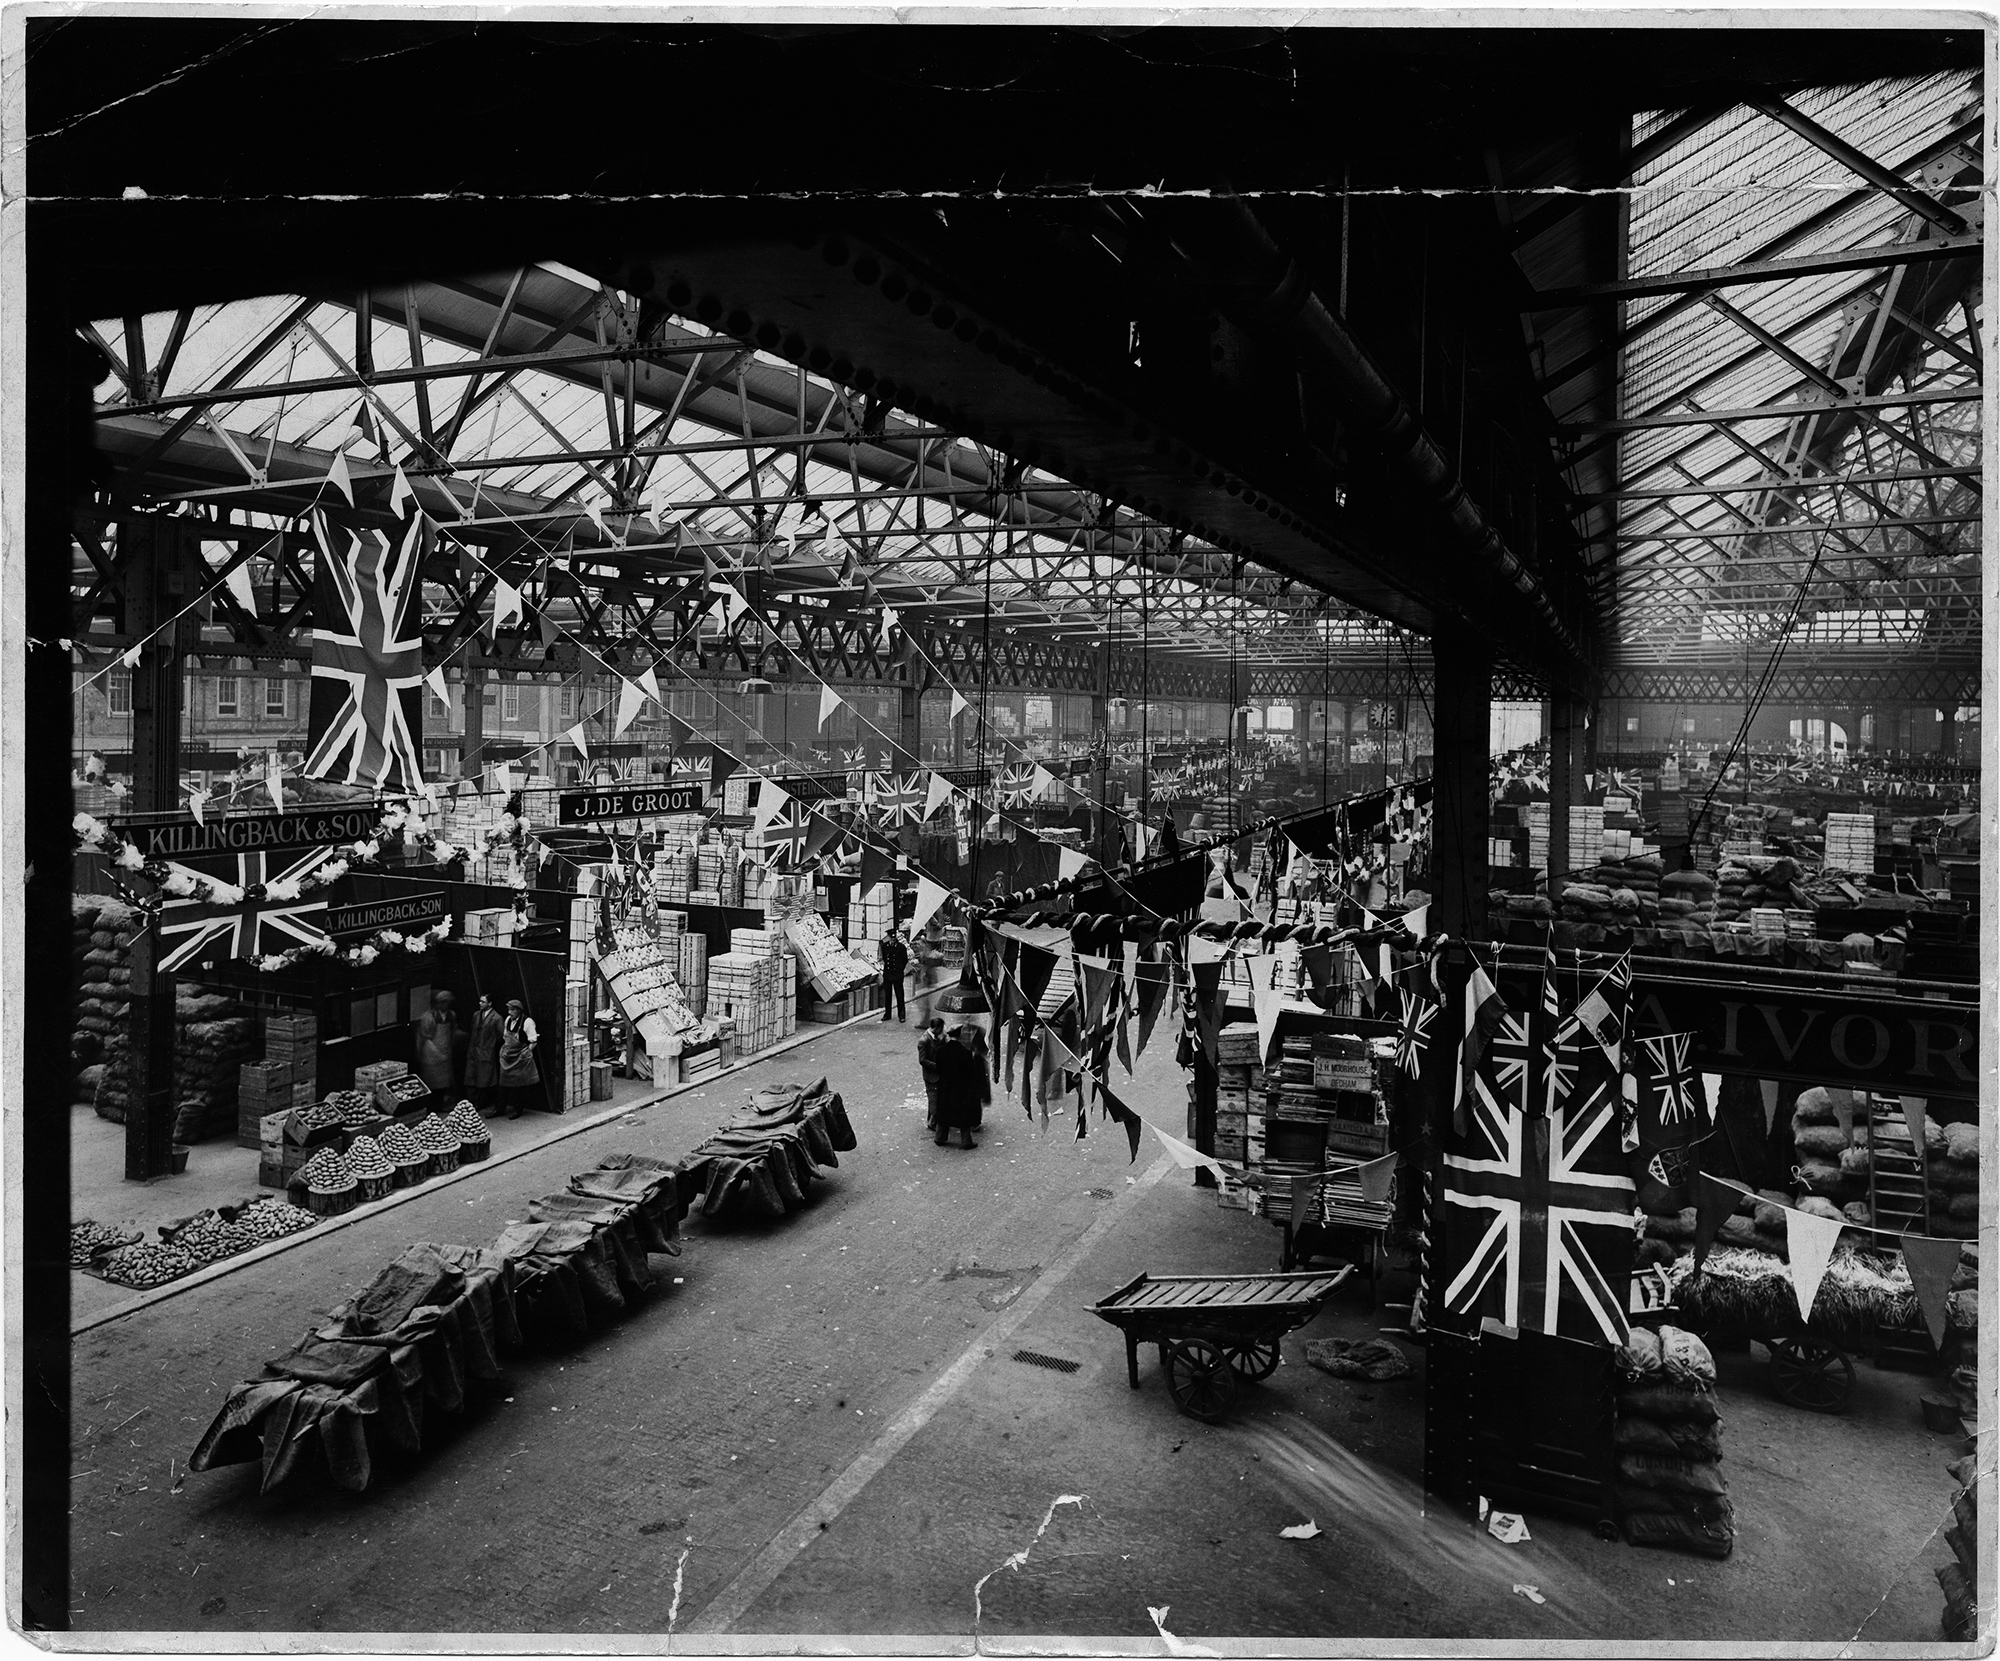 Union Jack flags and bunting in Old Spitalfields Market, 1928.